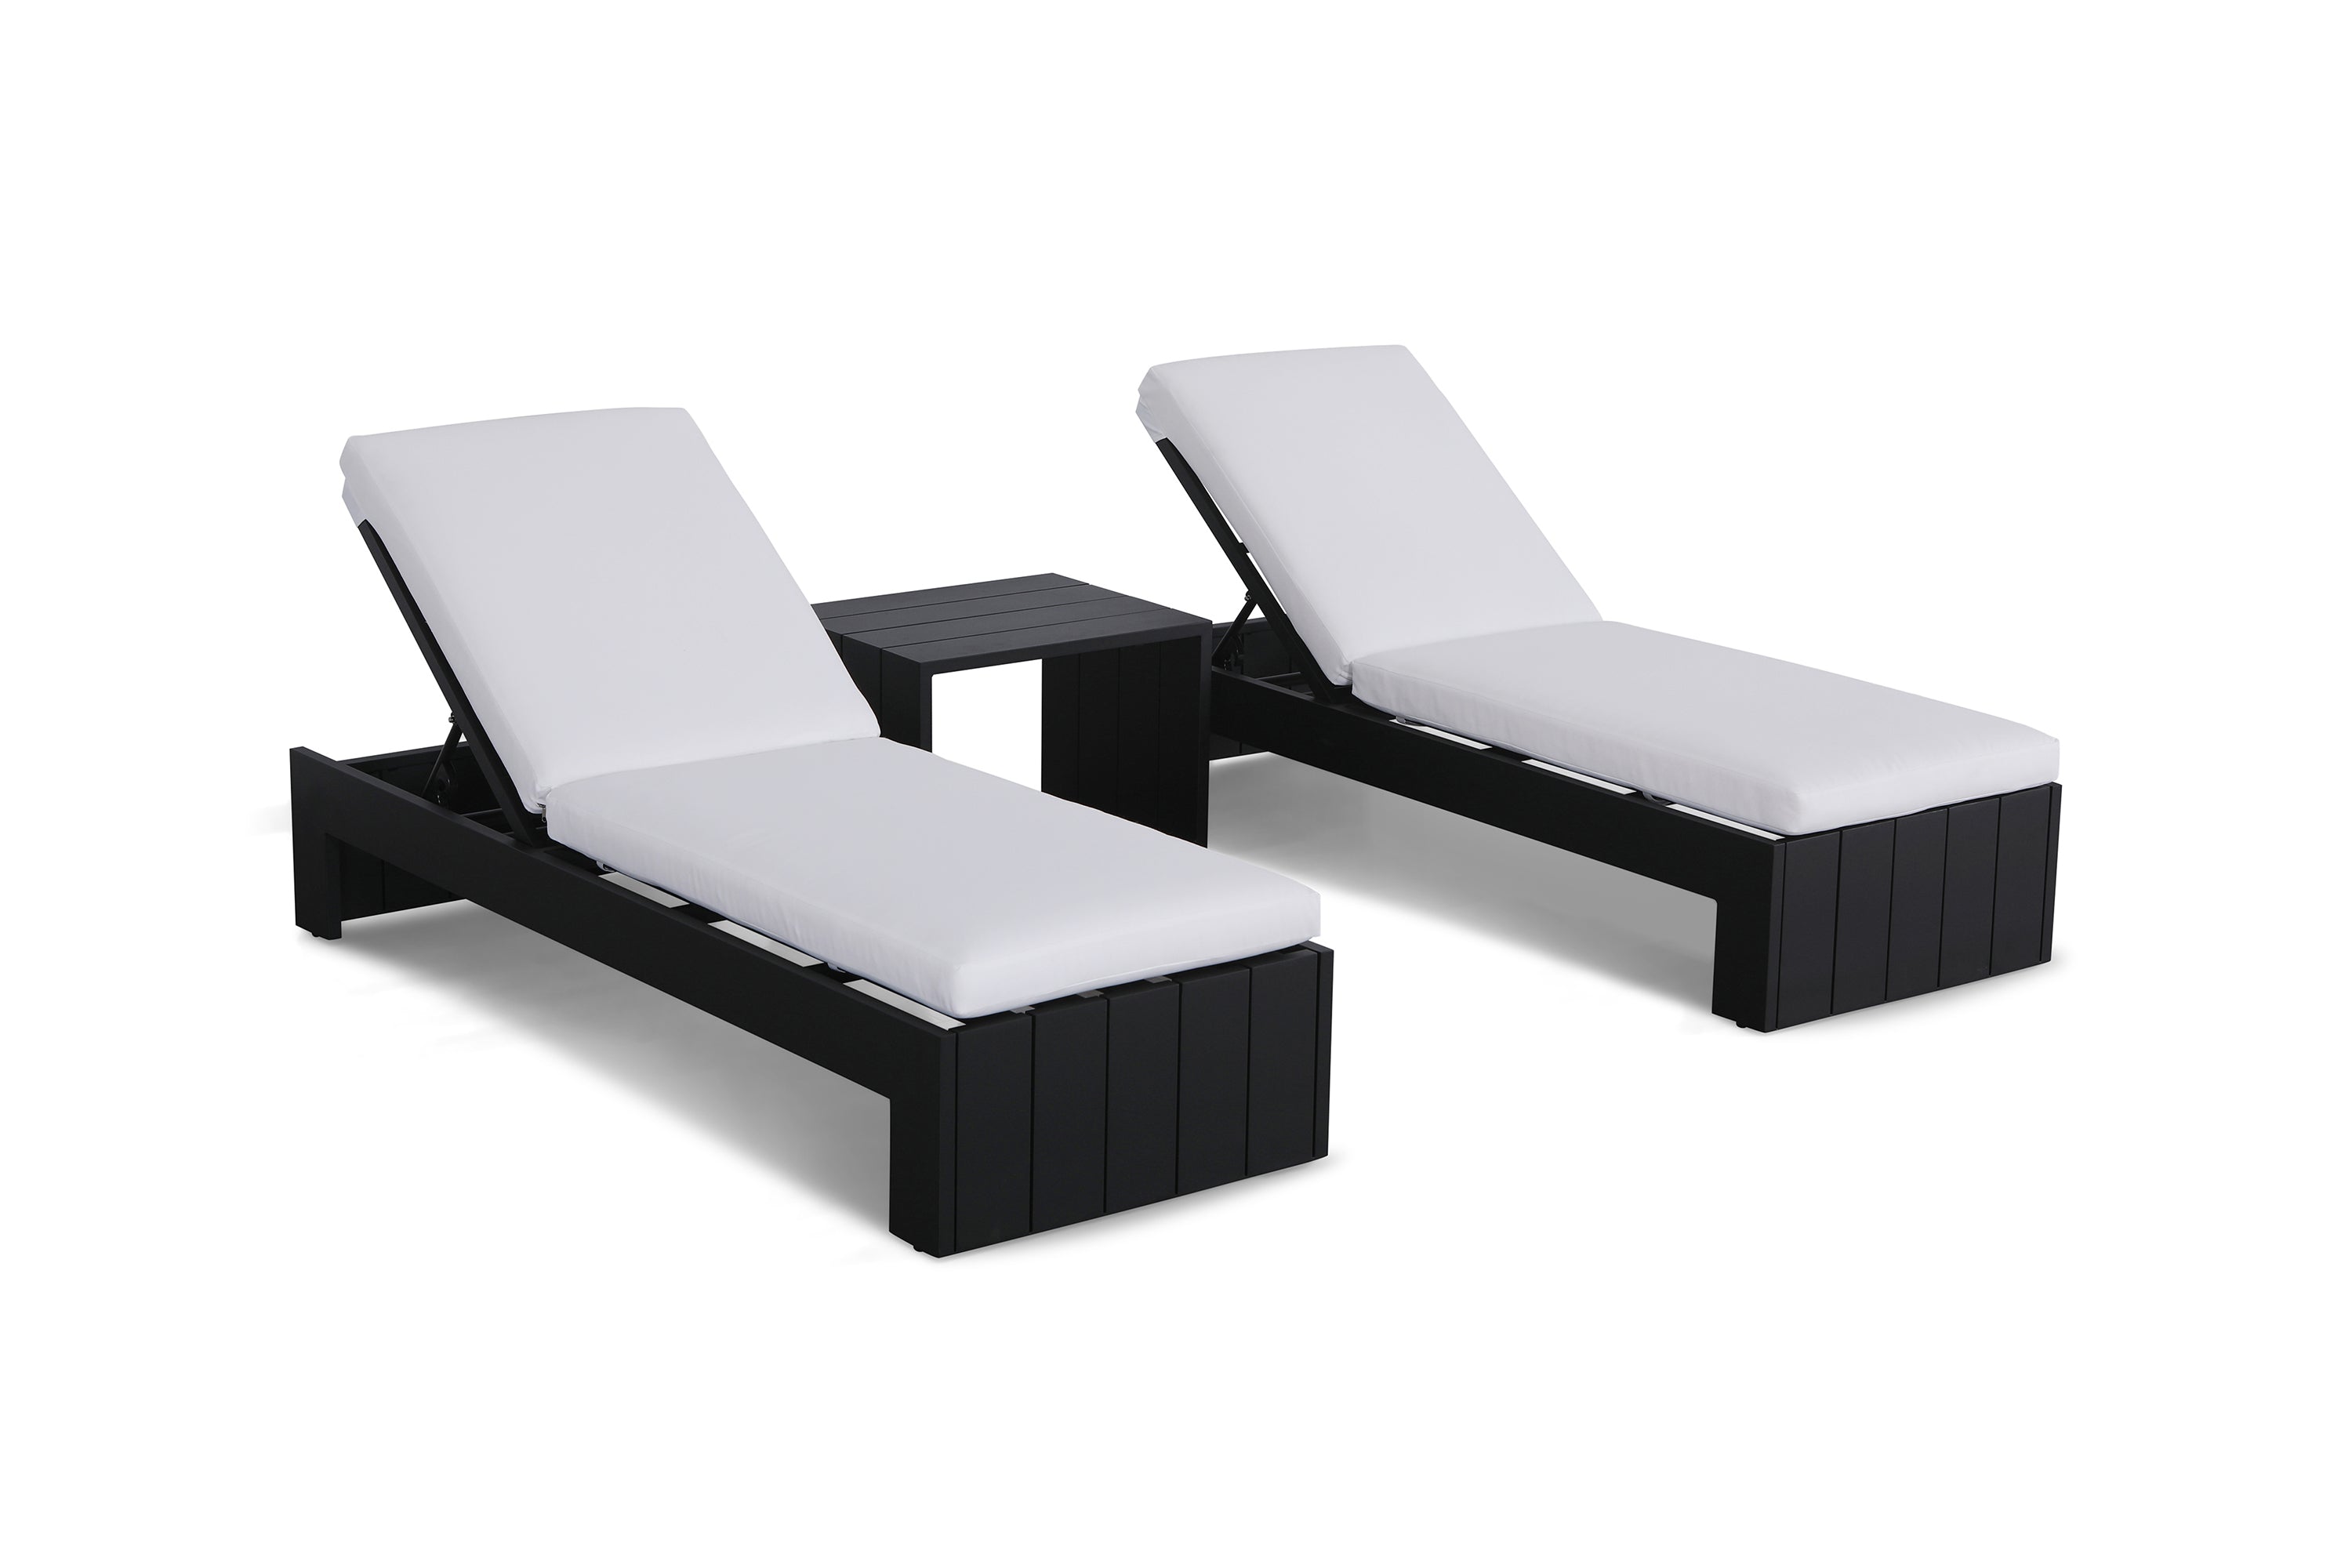 Monroe 3 Piece Set of Chaise Lounges with End Table